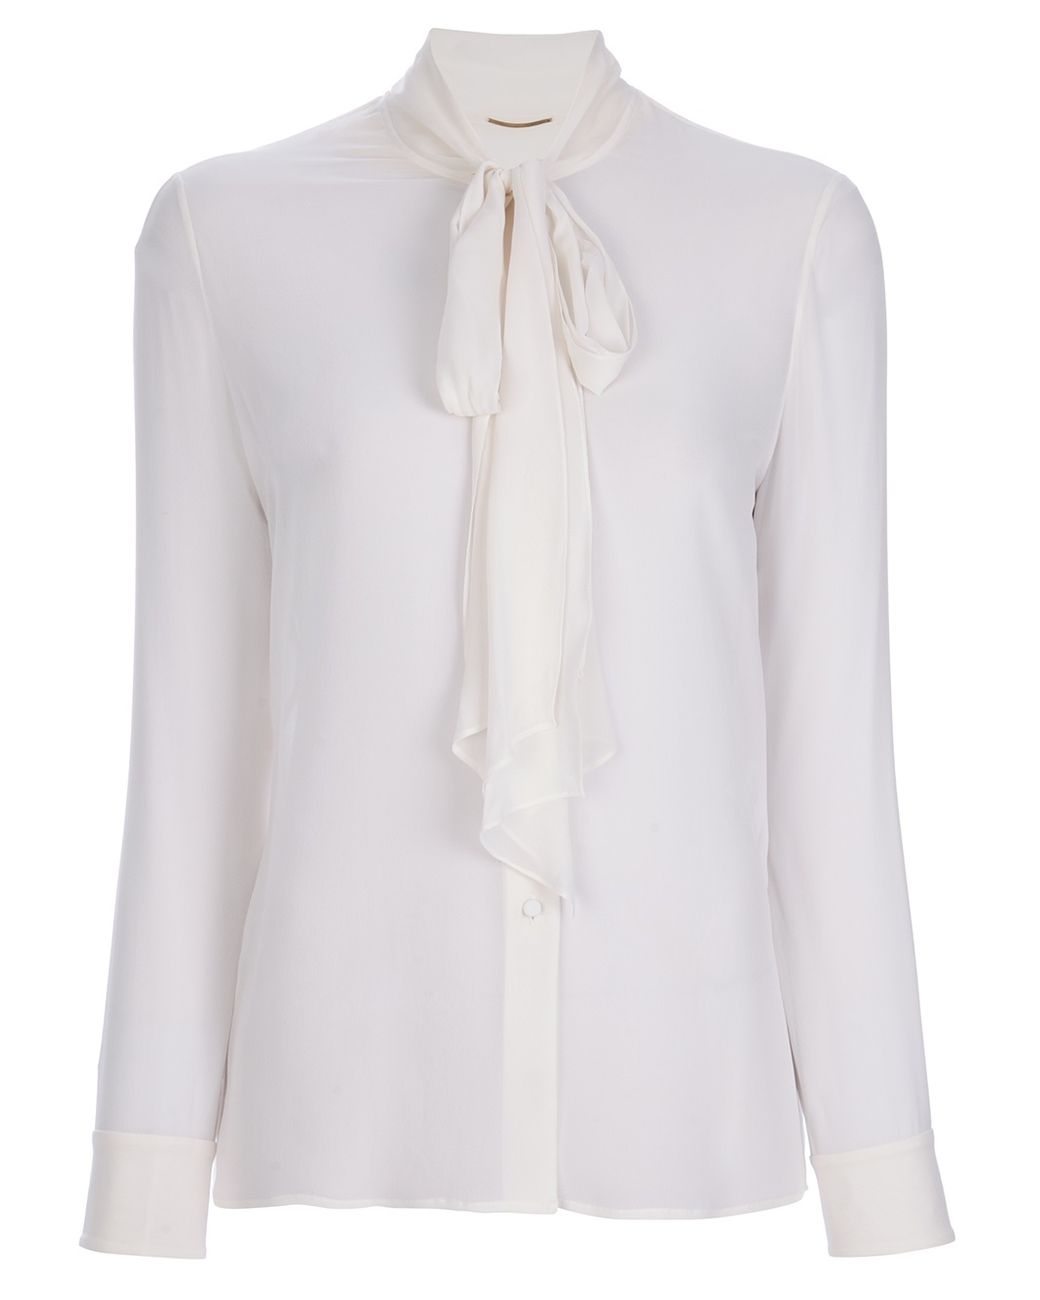 Saint Laurent Pussy Bow Blouse in White | Lyst